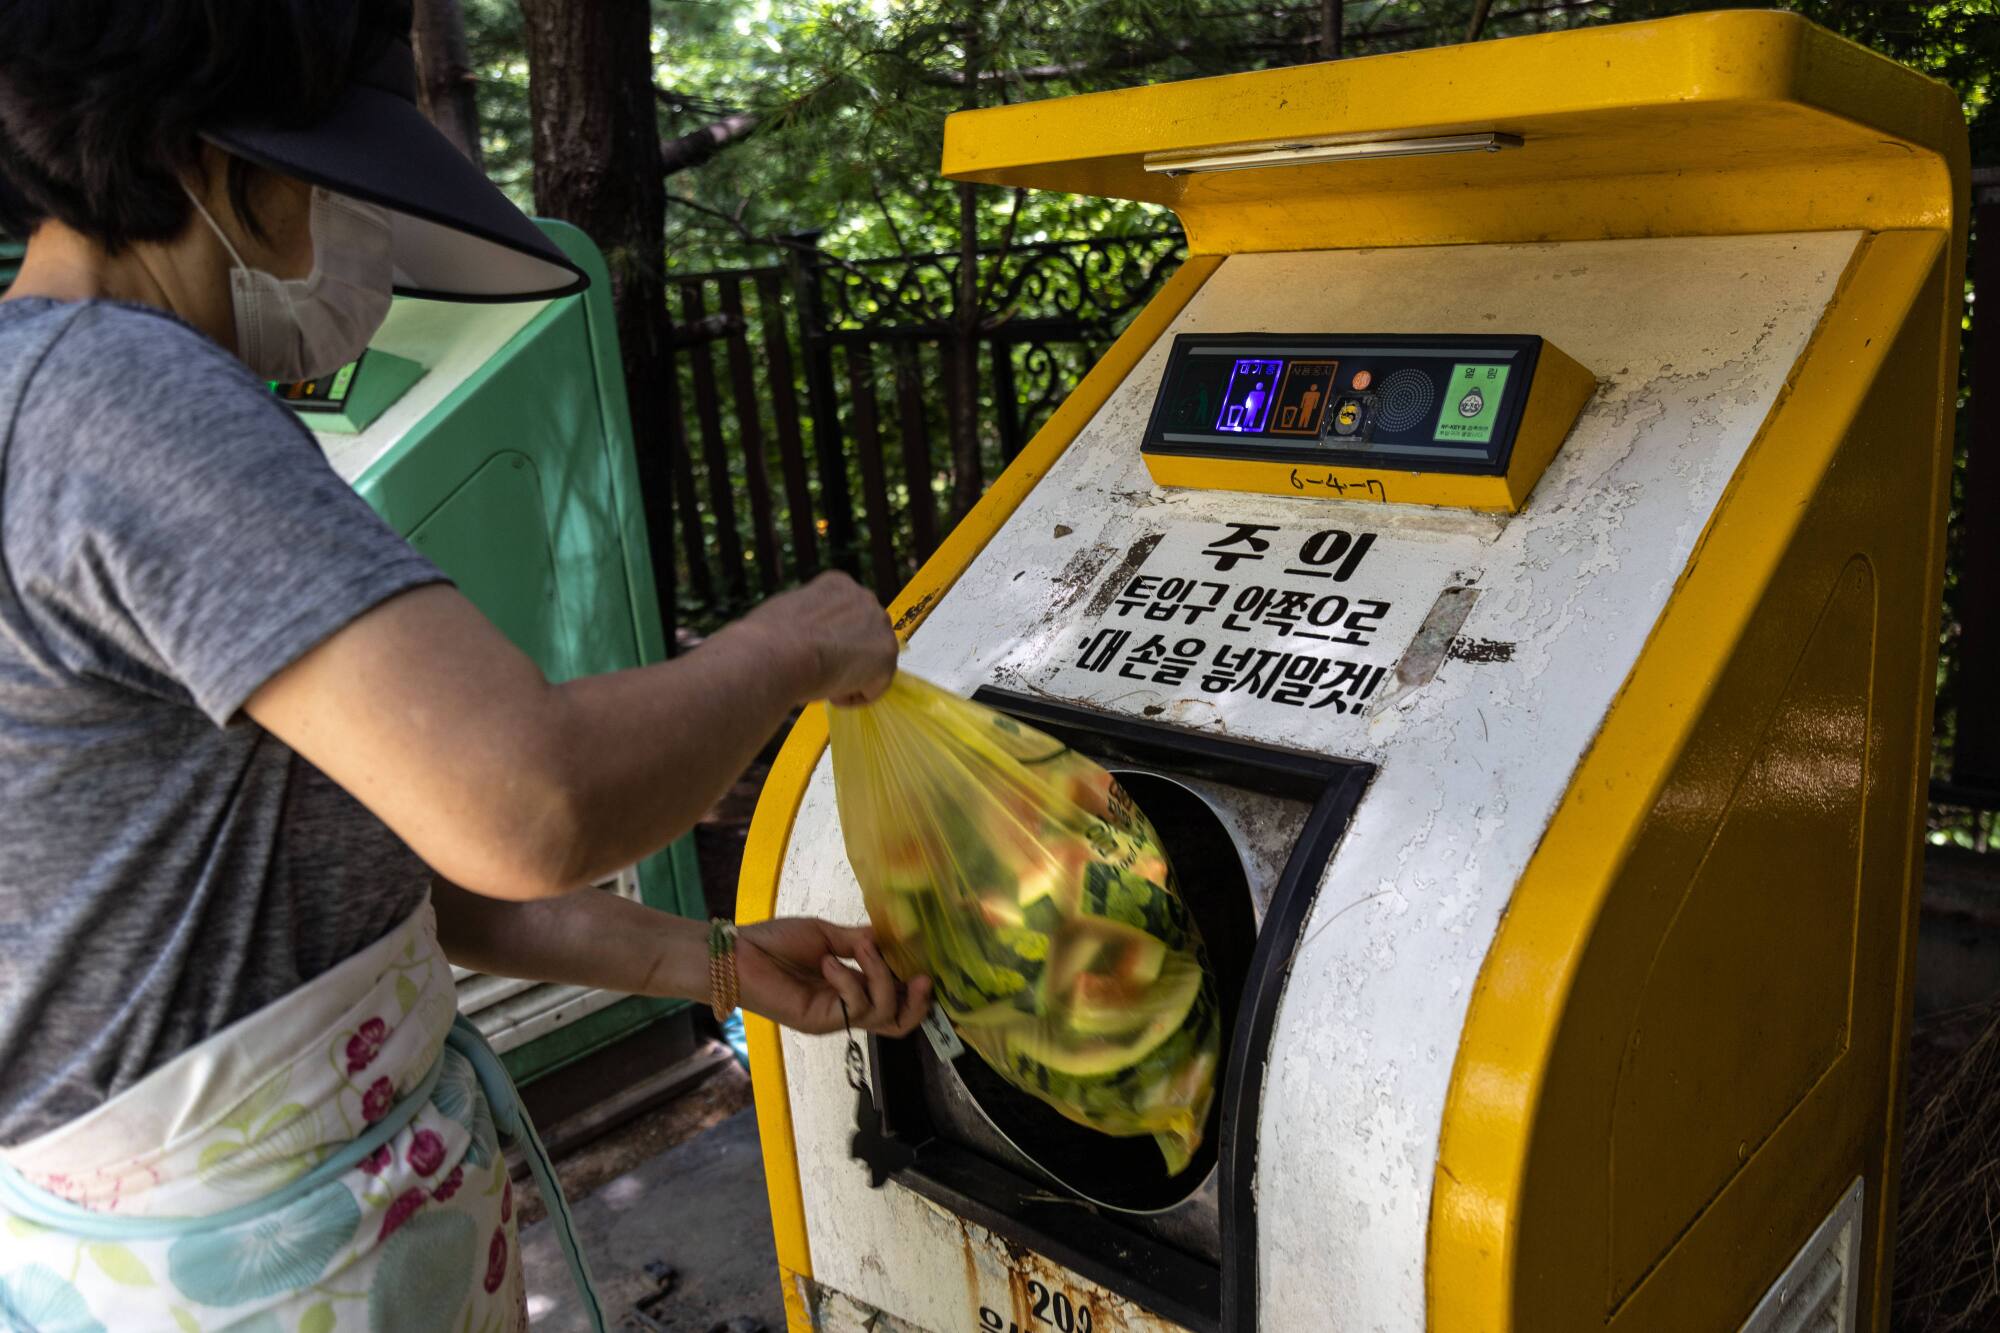 A woman deposits the food waste into a food collecting machine called "CleanNet"